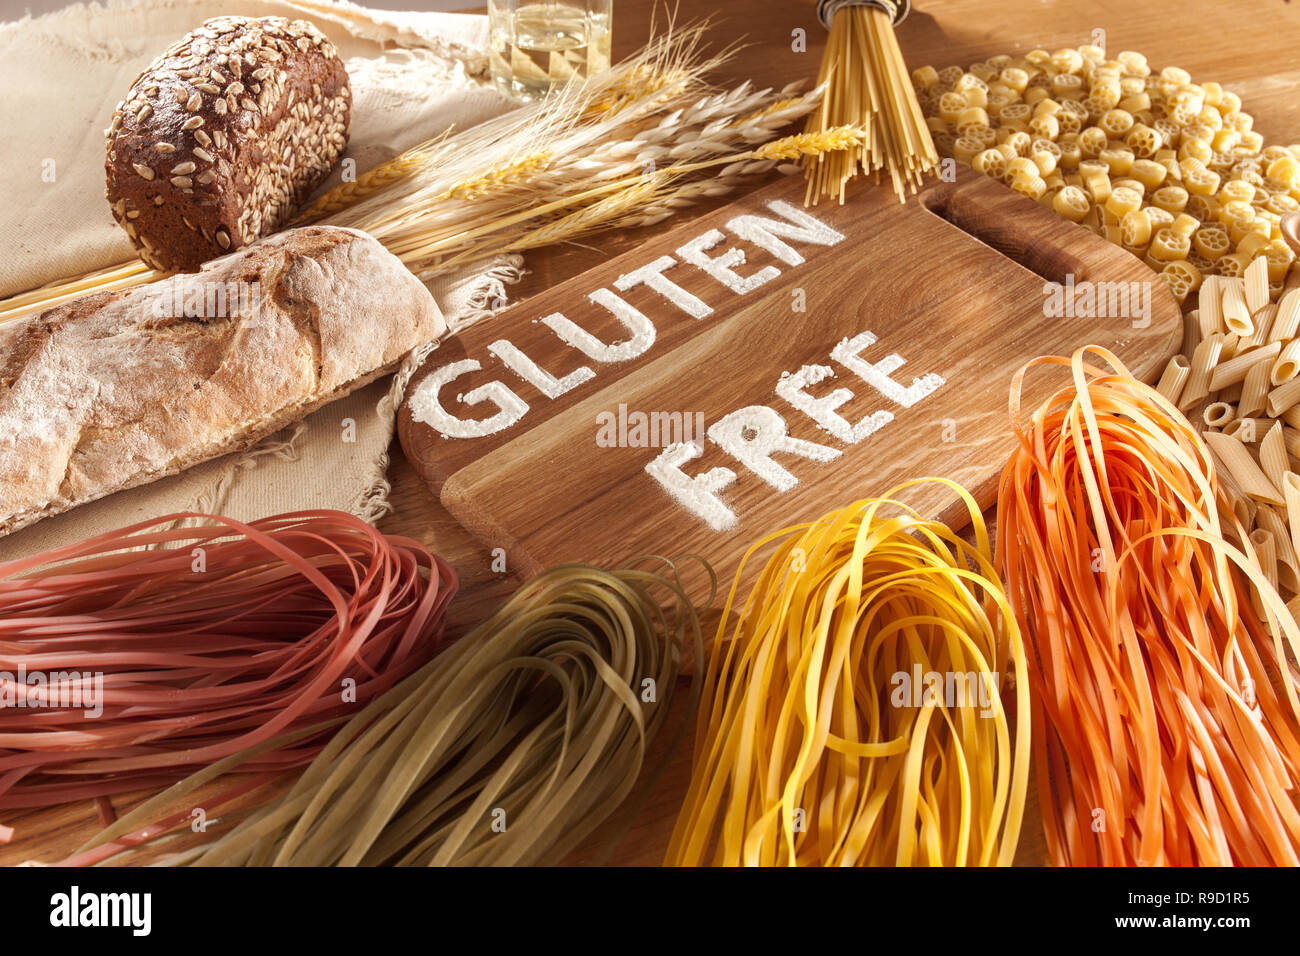 Gluten free food. Various pasta, bread and snacks on wooden background from top view. Healthy and diet concept. Stock Photo